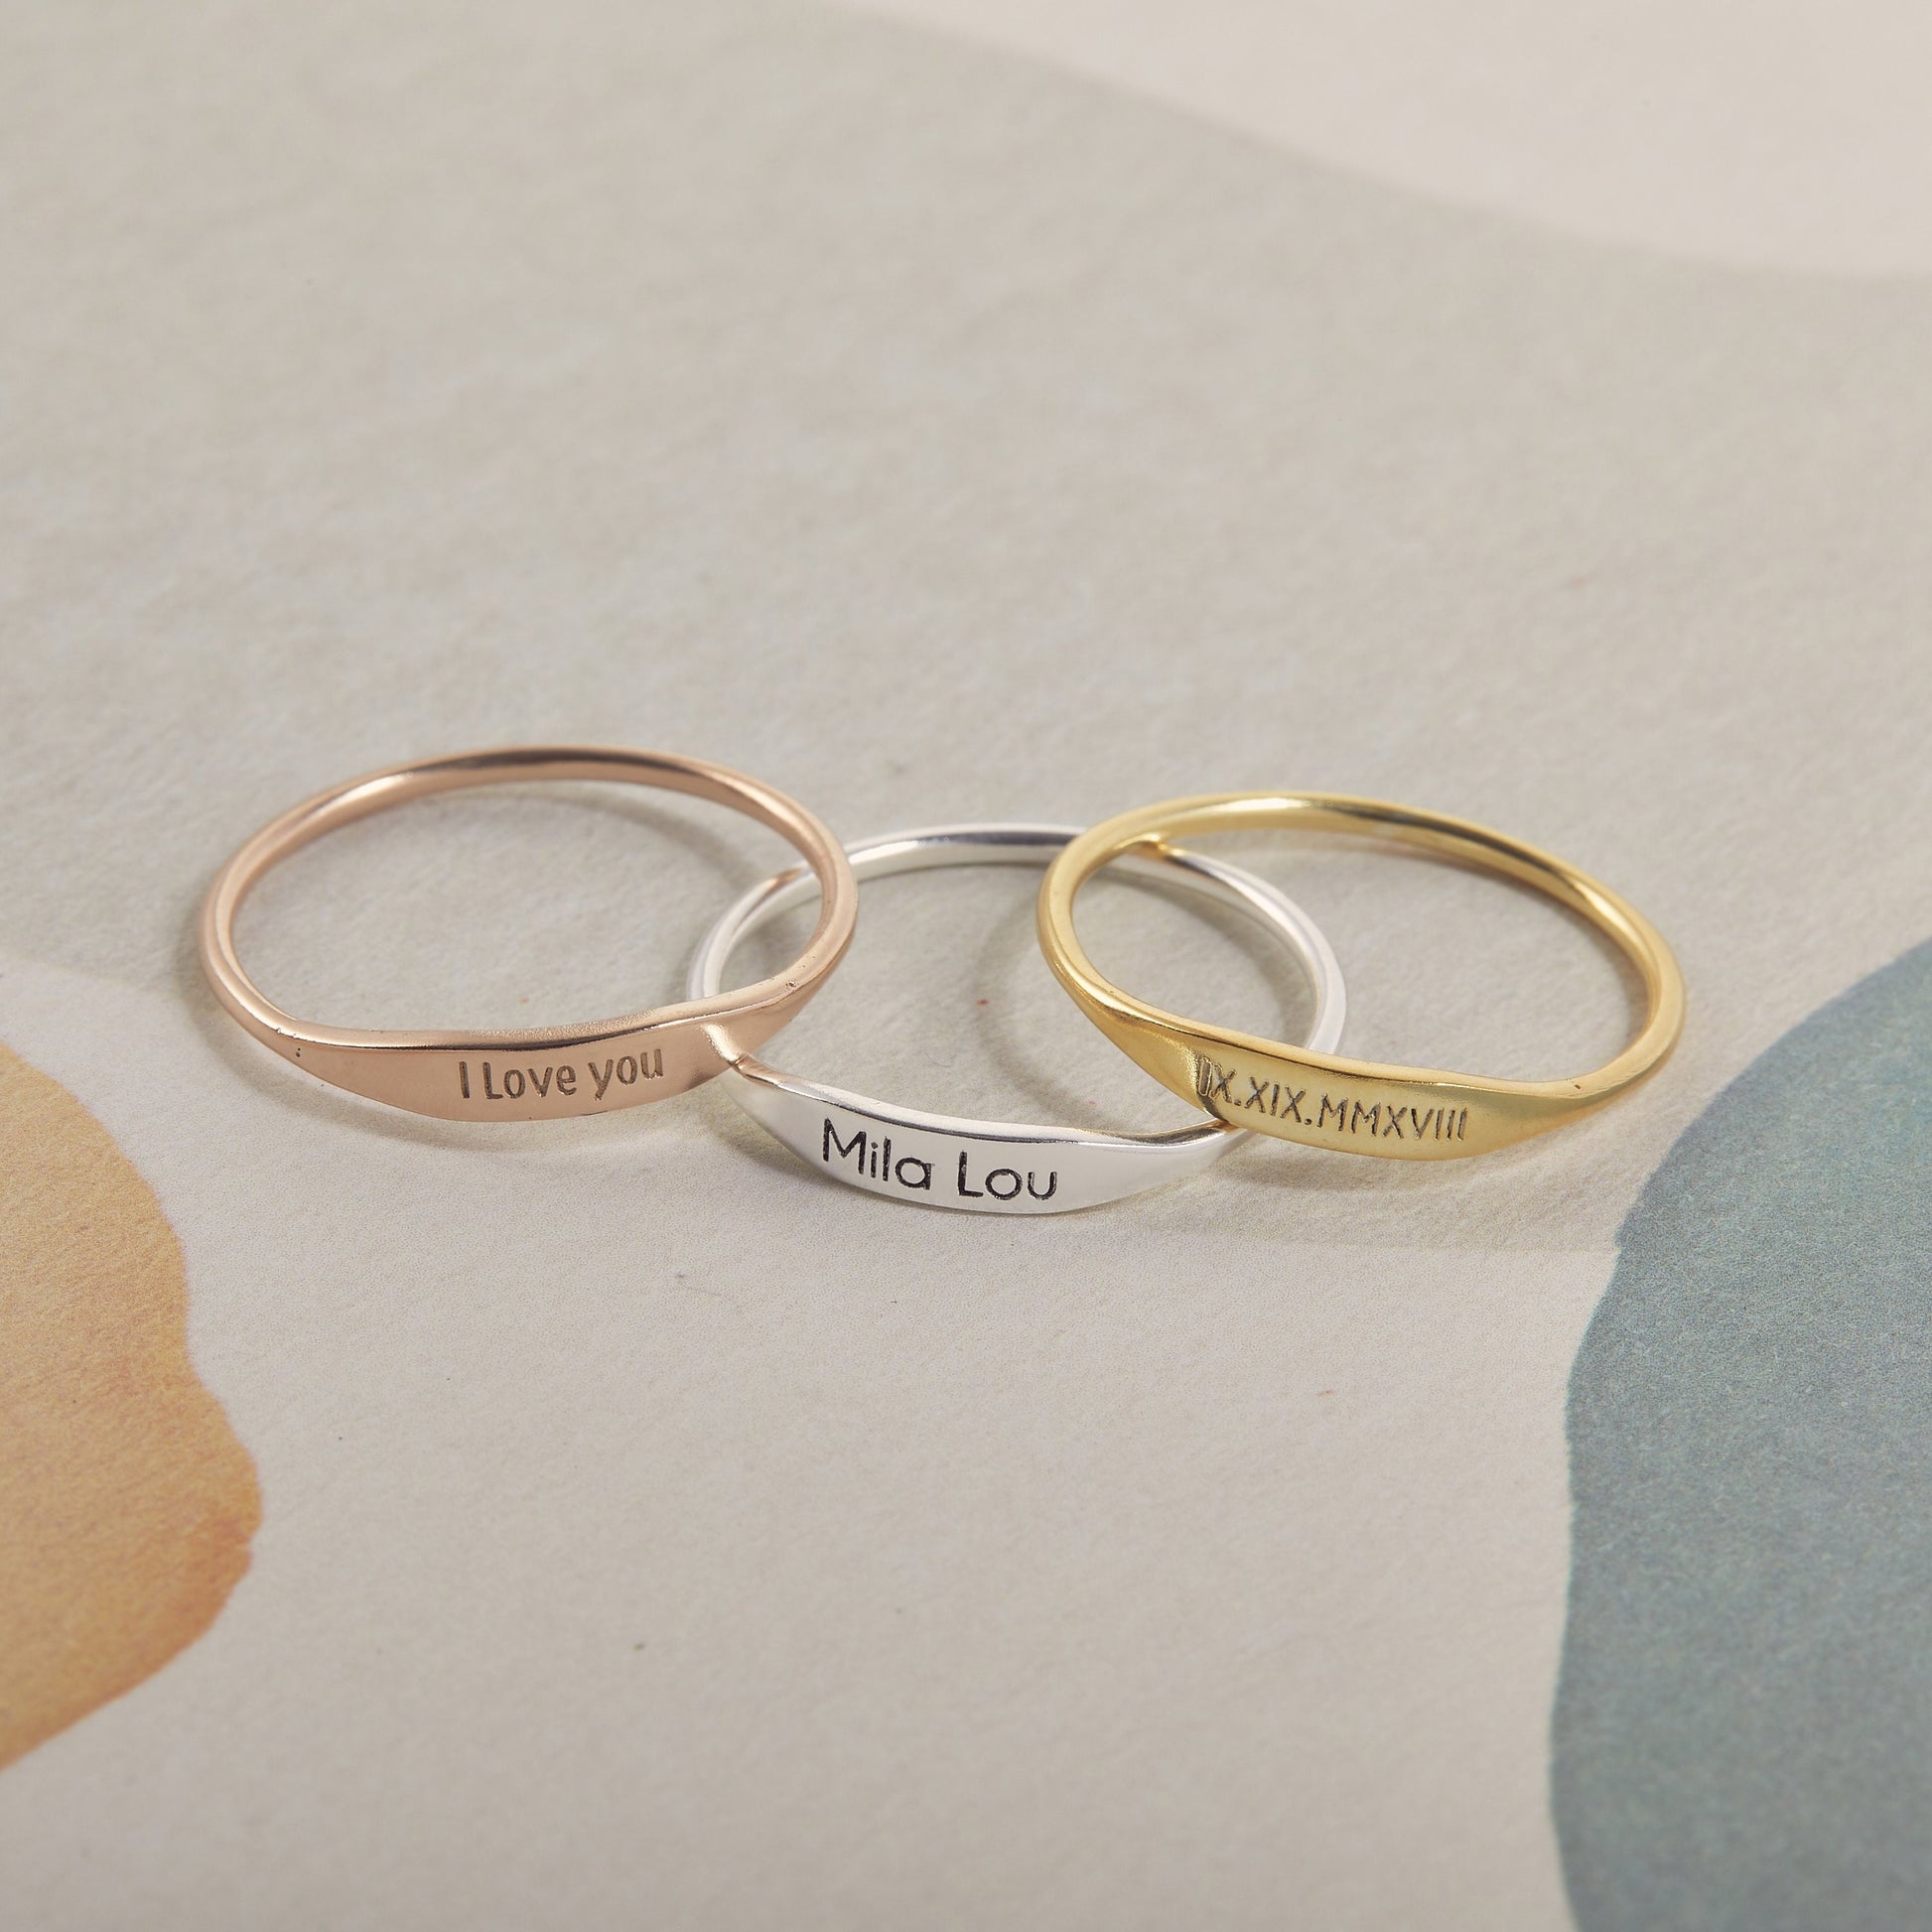 Personalized Dainty Ring | Custom Name Ring | Promise Silver Ring | Thin Stackable Ring | Stacking Ring | Family Ring | Minimalist Ring